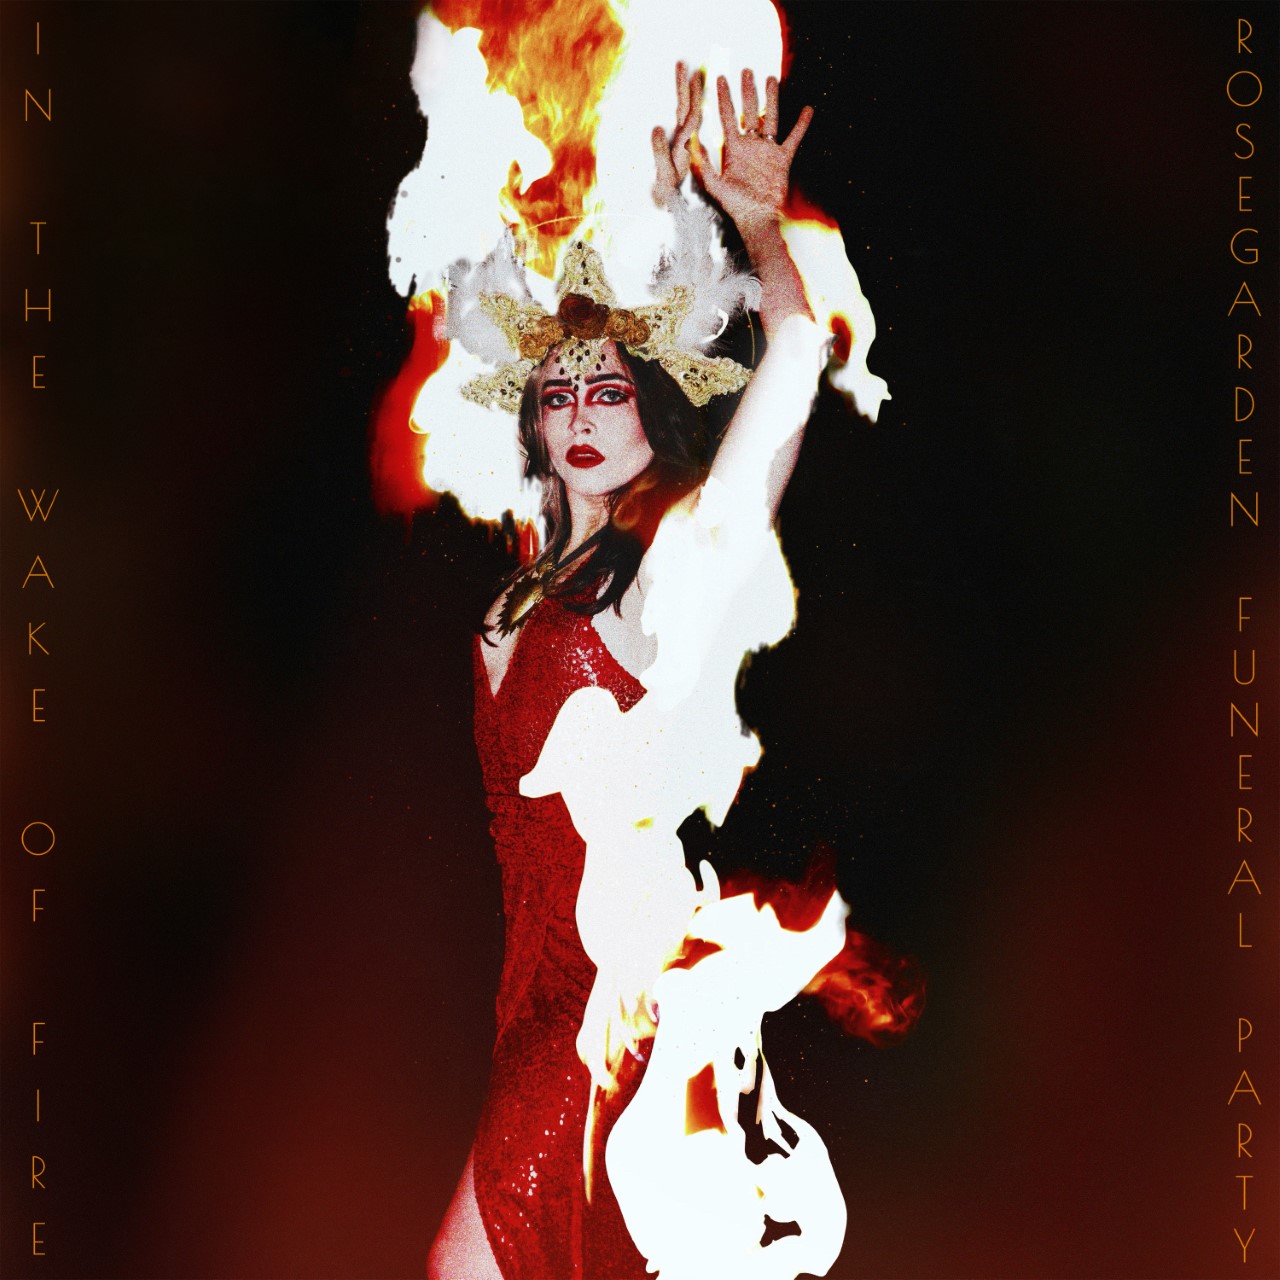 A woman wearing a red dress, is seen on fire, raising her arms to the sky